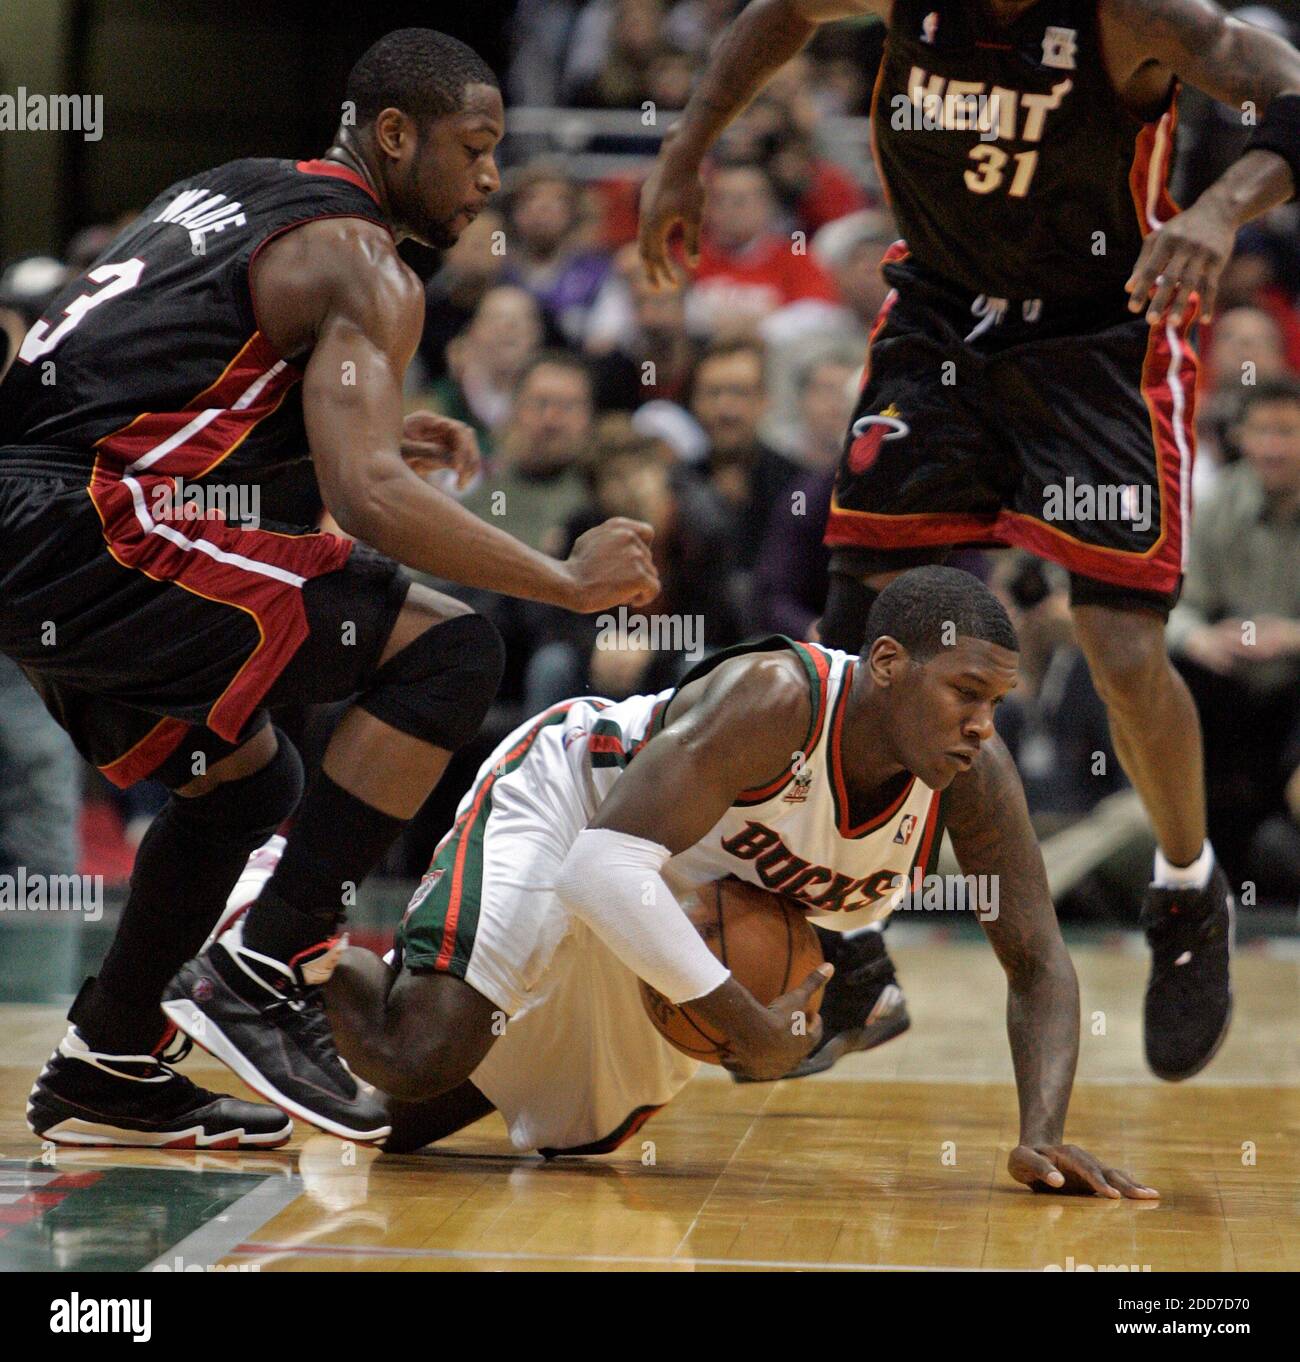 NO FILM, NO VIDEO, NO TV, NO DOCUMENTARY - Milwaukee Bucks' Royal Ivey dives for a loose ball in front of Miami Herald's Dwyane Wade in first half action at the Bradley Center in Milwaukee, WI, USA on January 9, 2008 . Milwaukee Bucks won 98-92. Photo by Jeffrey Phelps/Milwaukee Jour Stock Photo